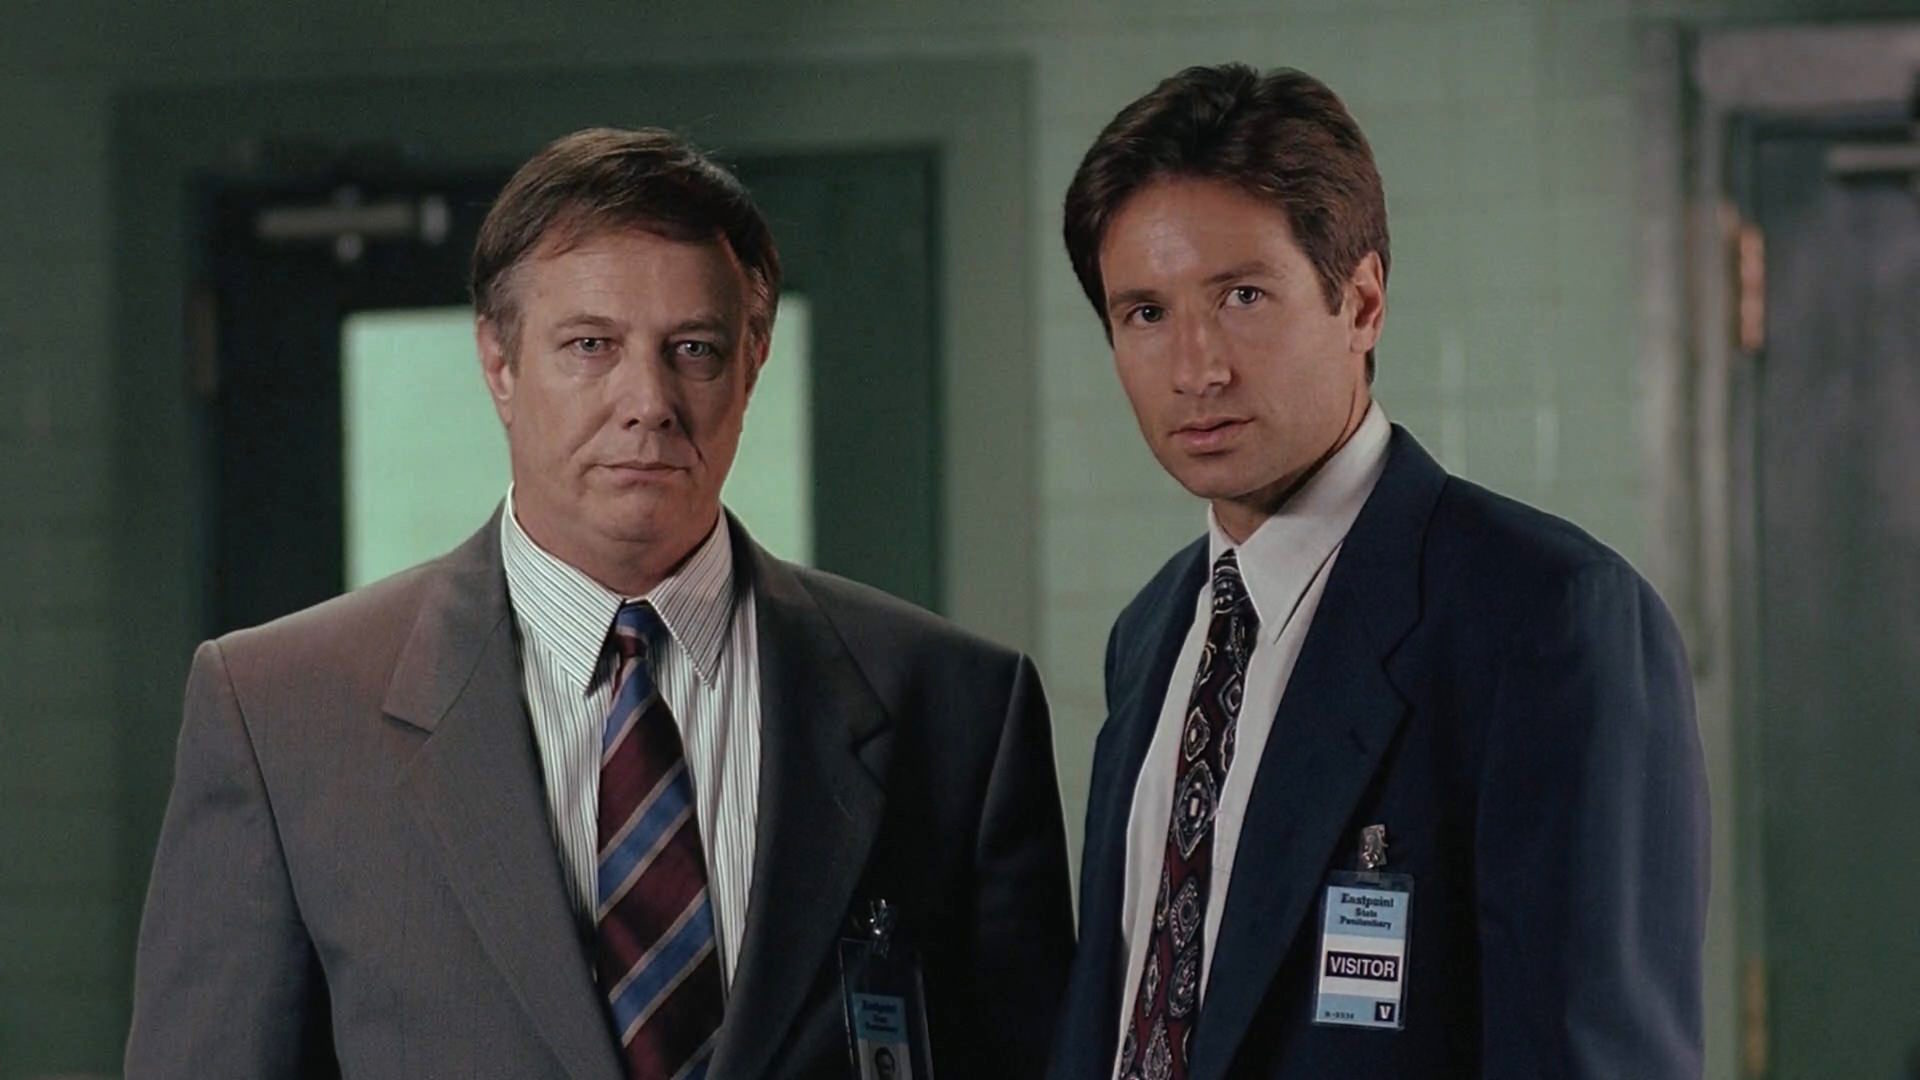 David Duchovny and J.T. Walsh in The X-Files (1993)